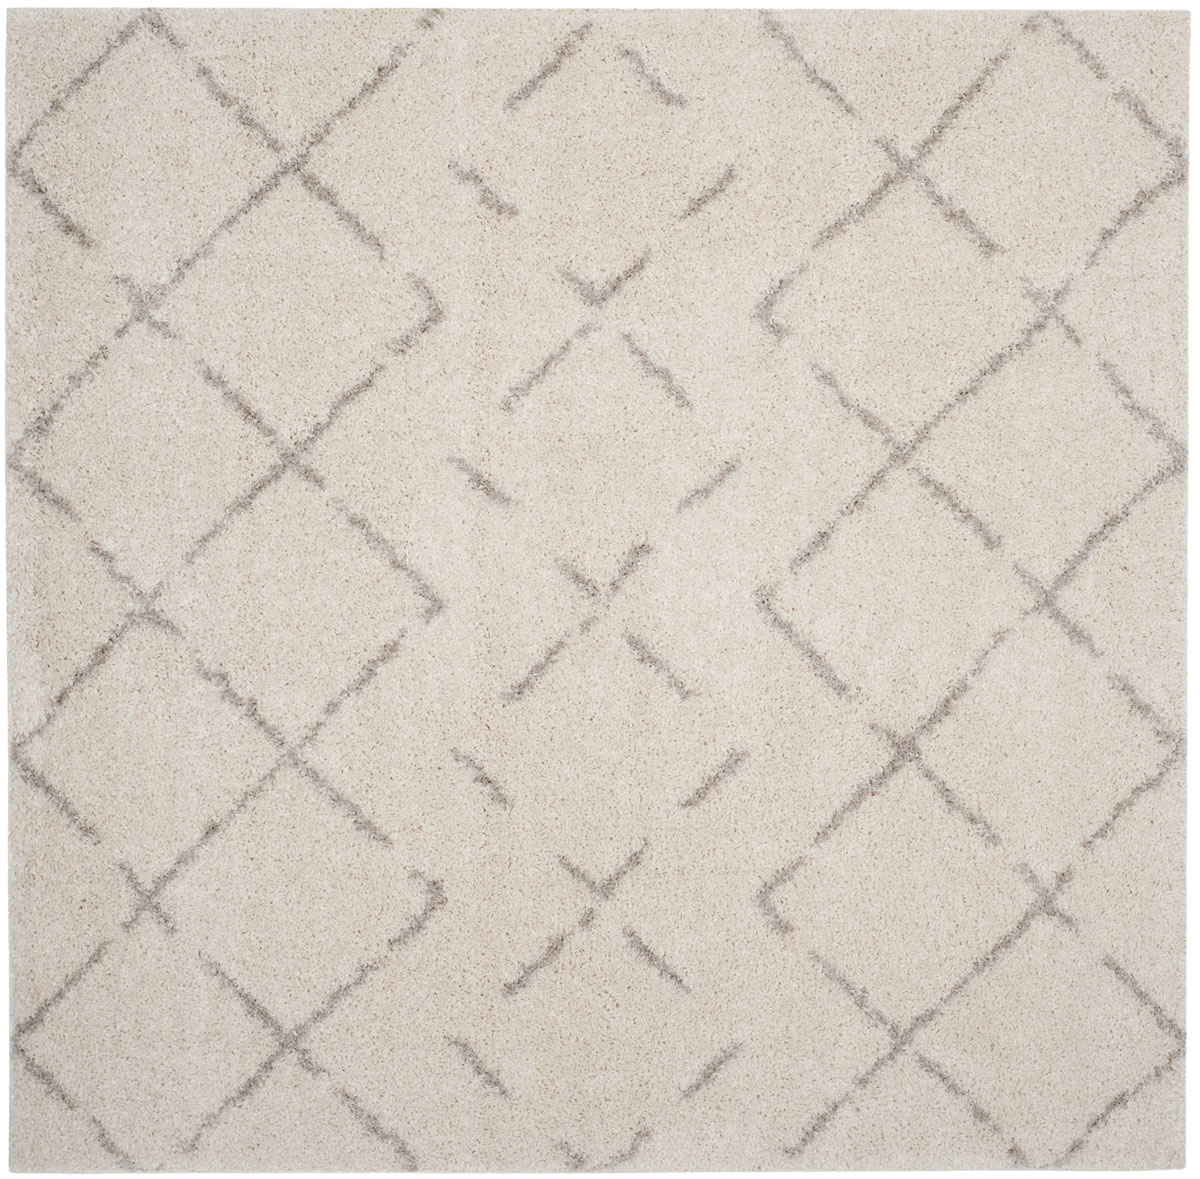 Asg743a-7sq Arizona Shag Power Loomed Square Area Rug, Ivory & Beige - 6 Ft.-7 In. X 6 Ft.-7 In.